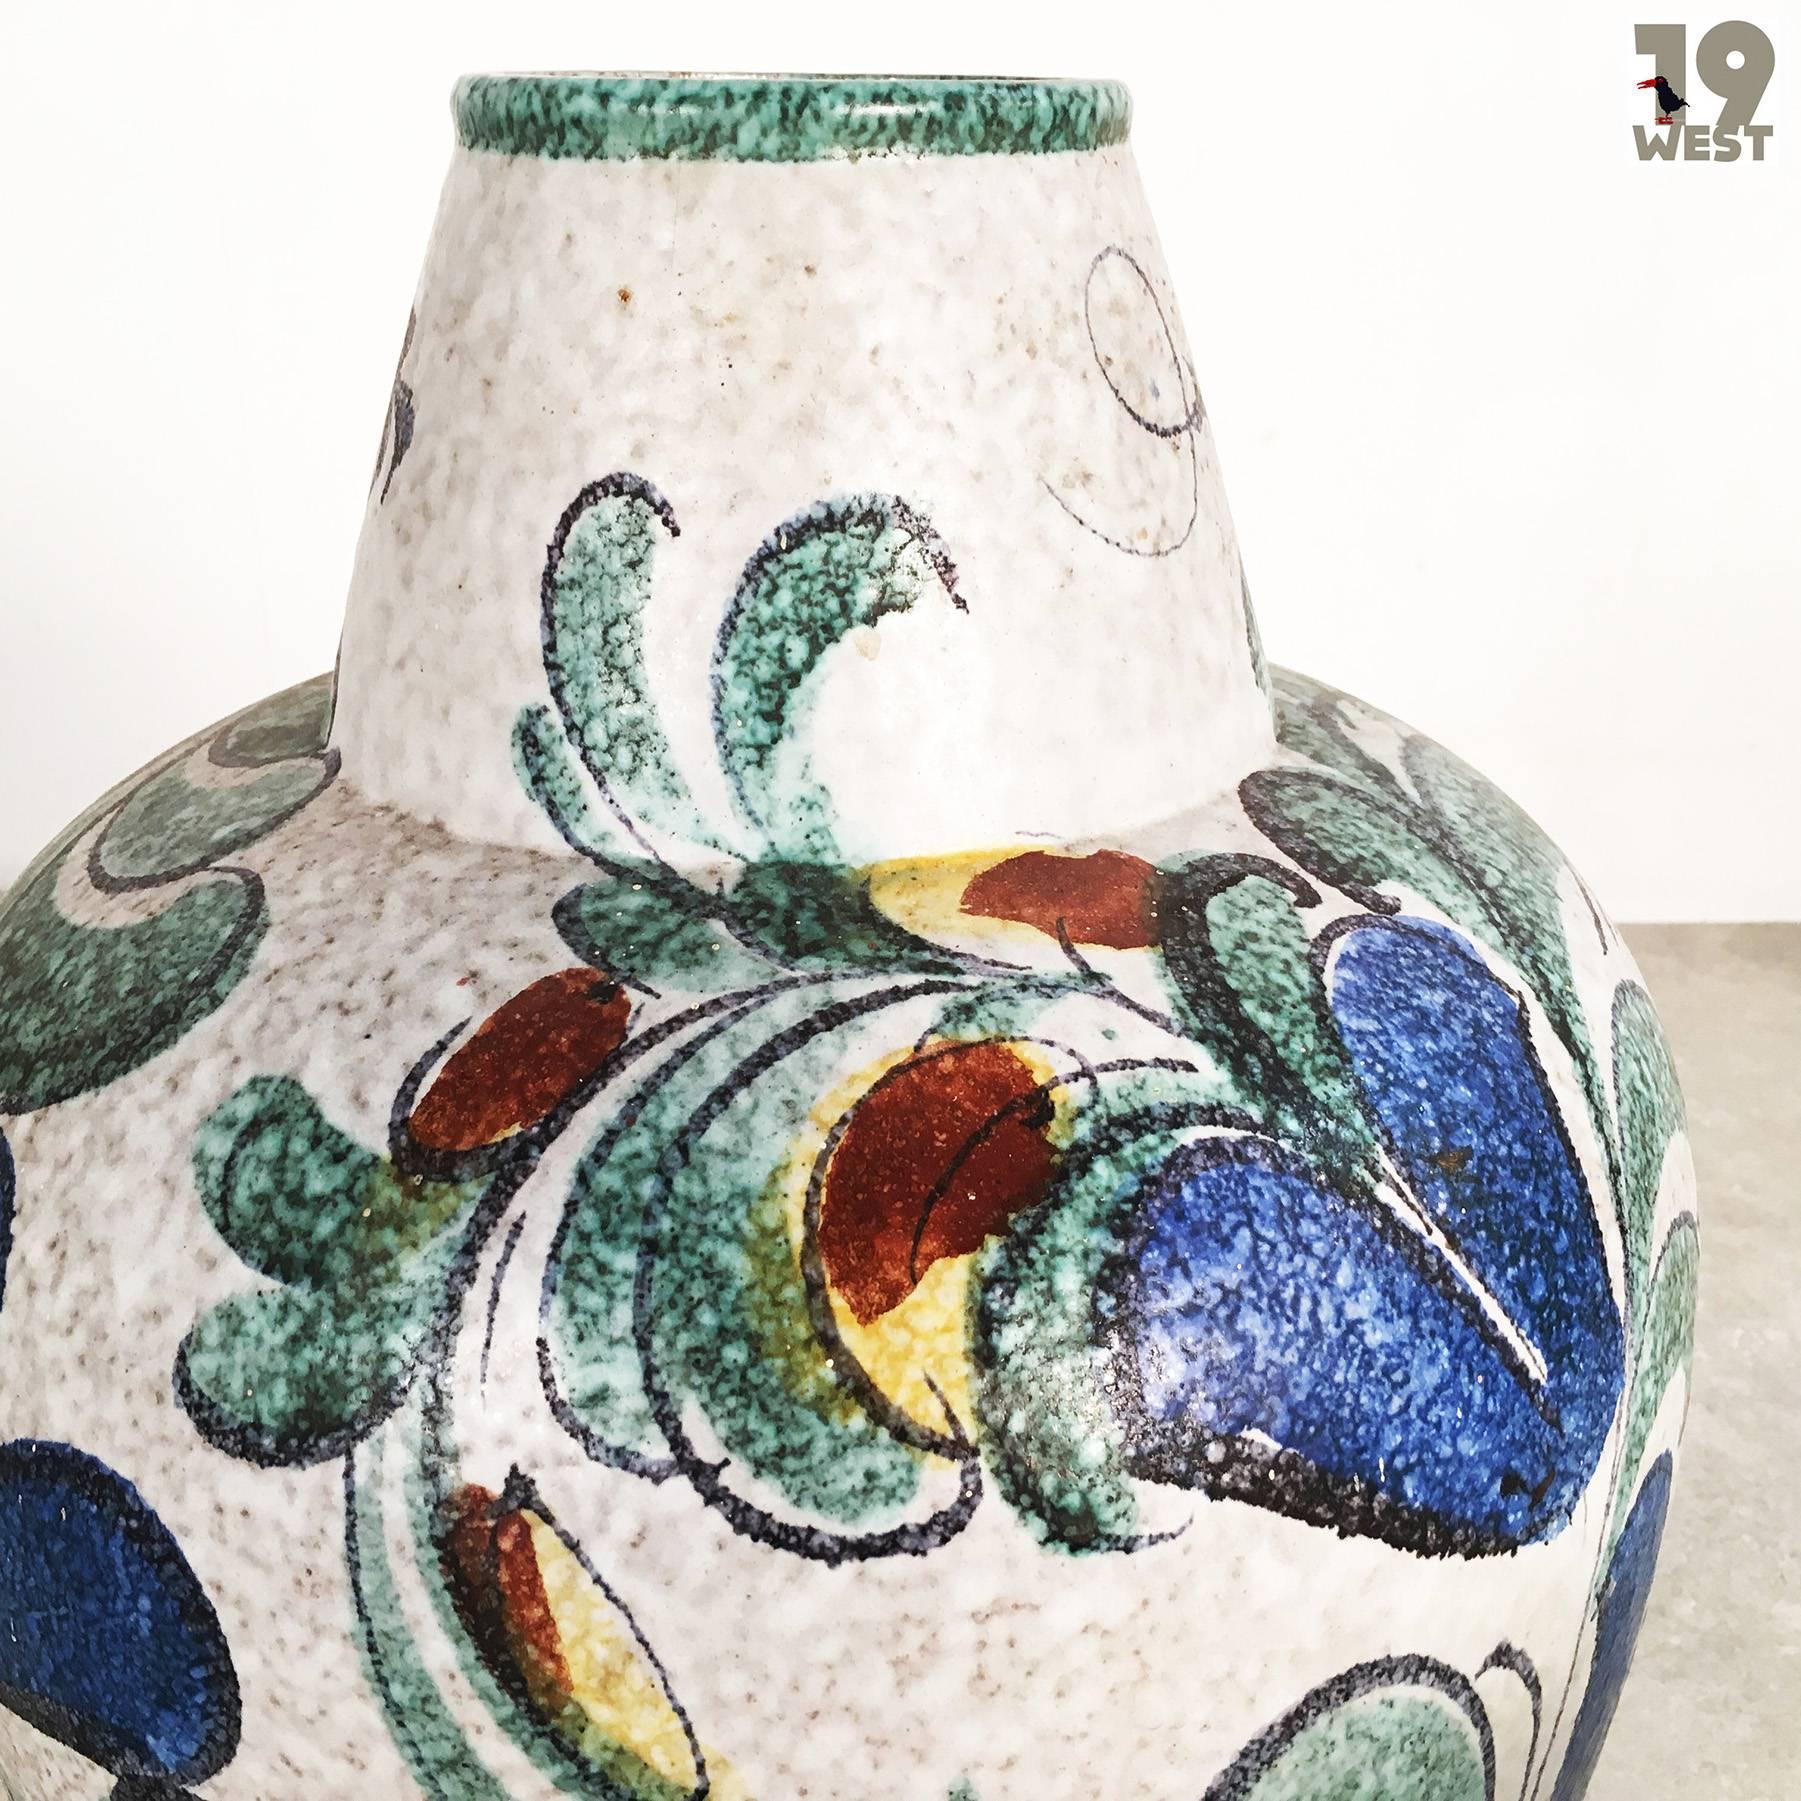 Mid-Century Modern Large Ceramic Floor Vase from the 1950s, Manufactured by Ruscha For Sale